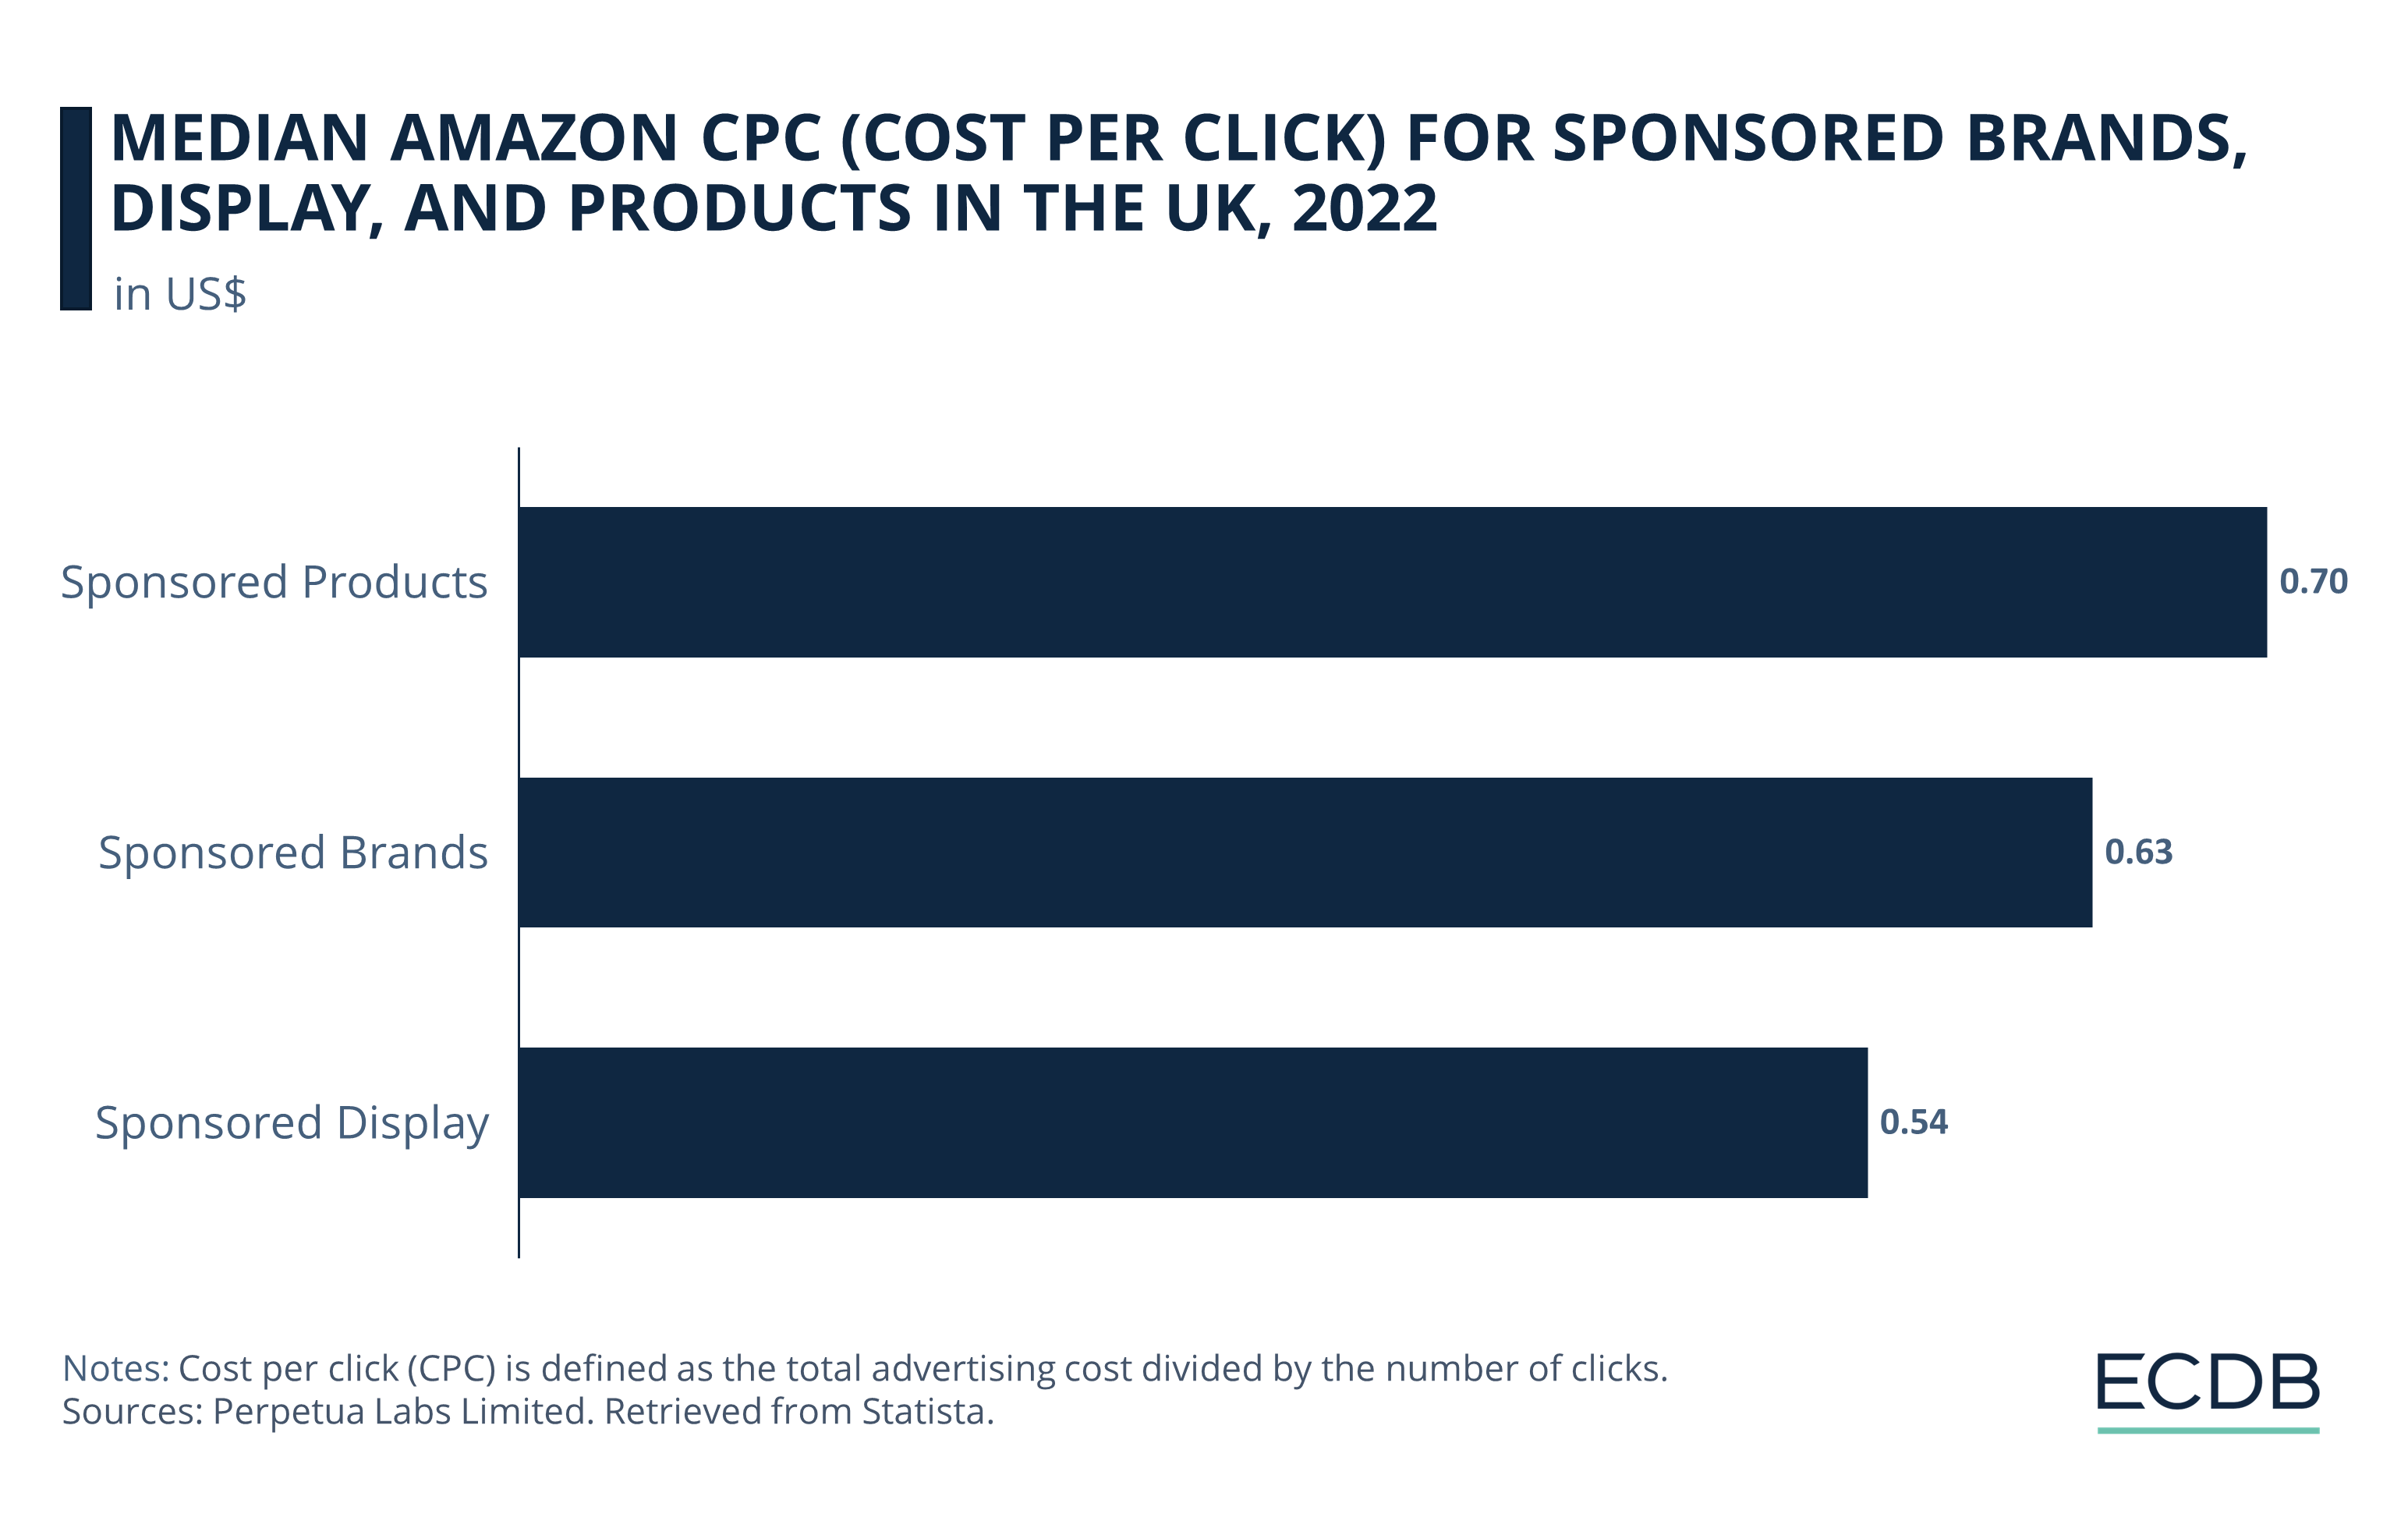 Median Amazon CPC (Cost per Click) for Sponsored Brands, Display, and Products in the UK, 2022